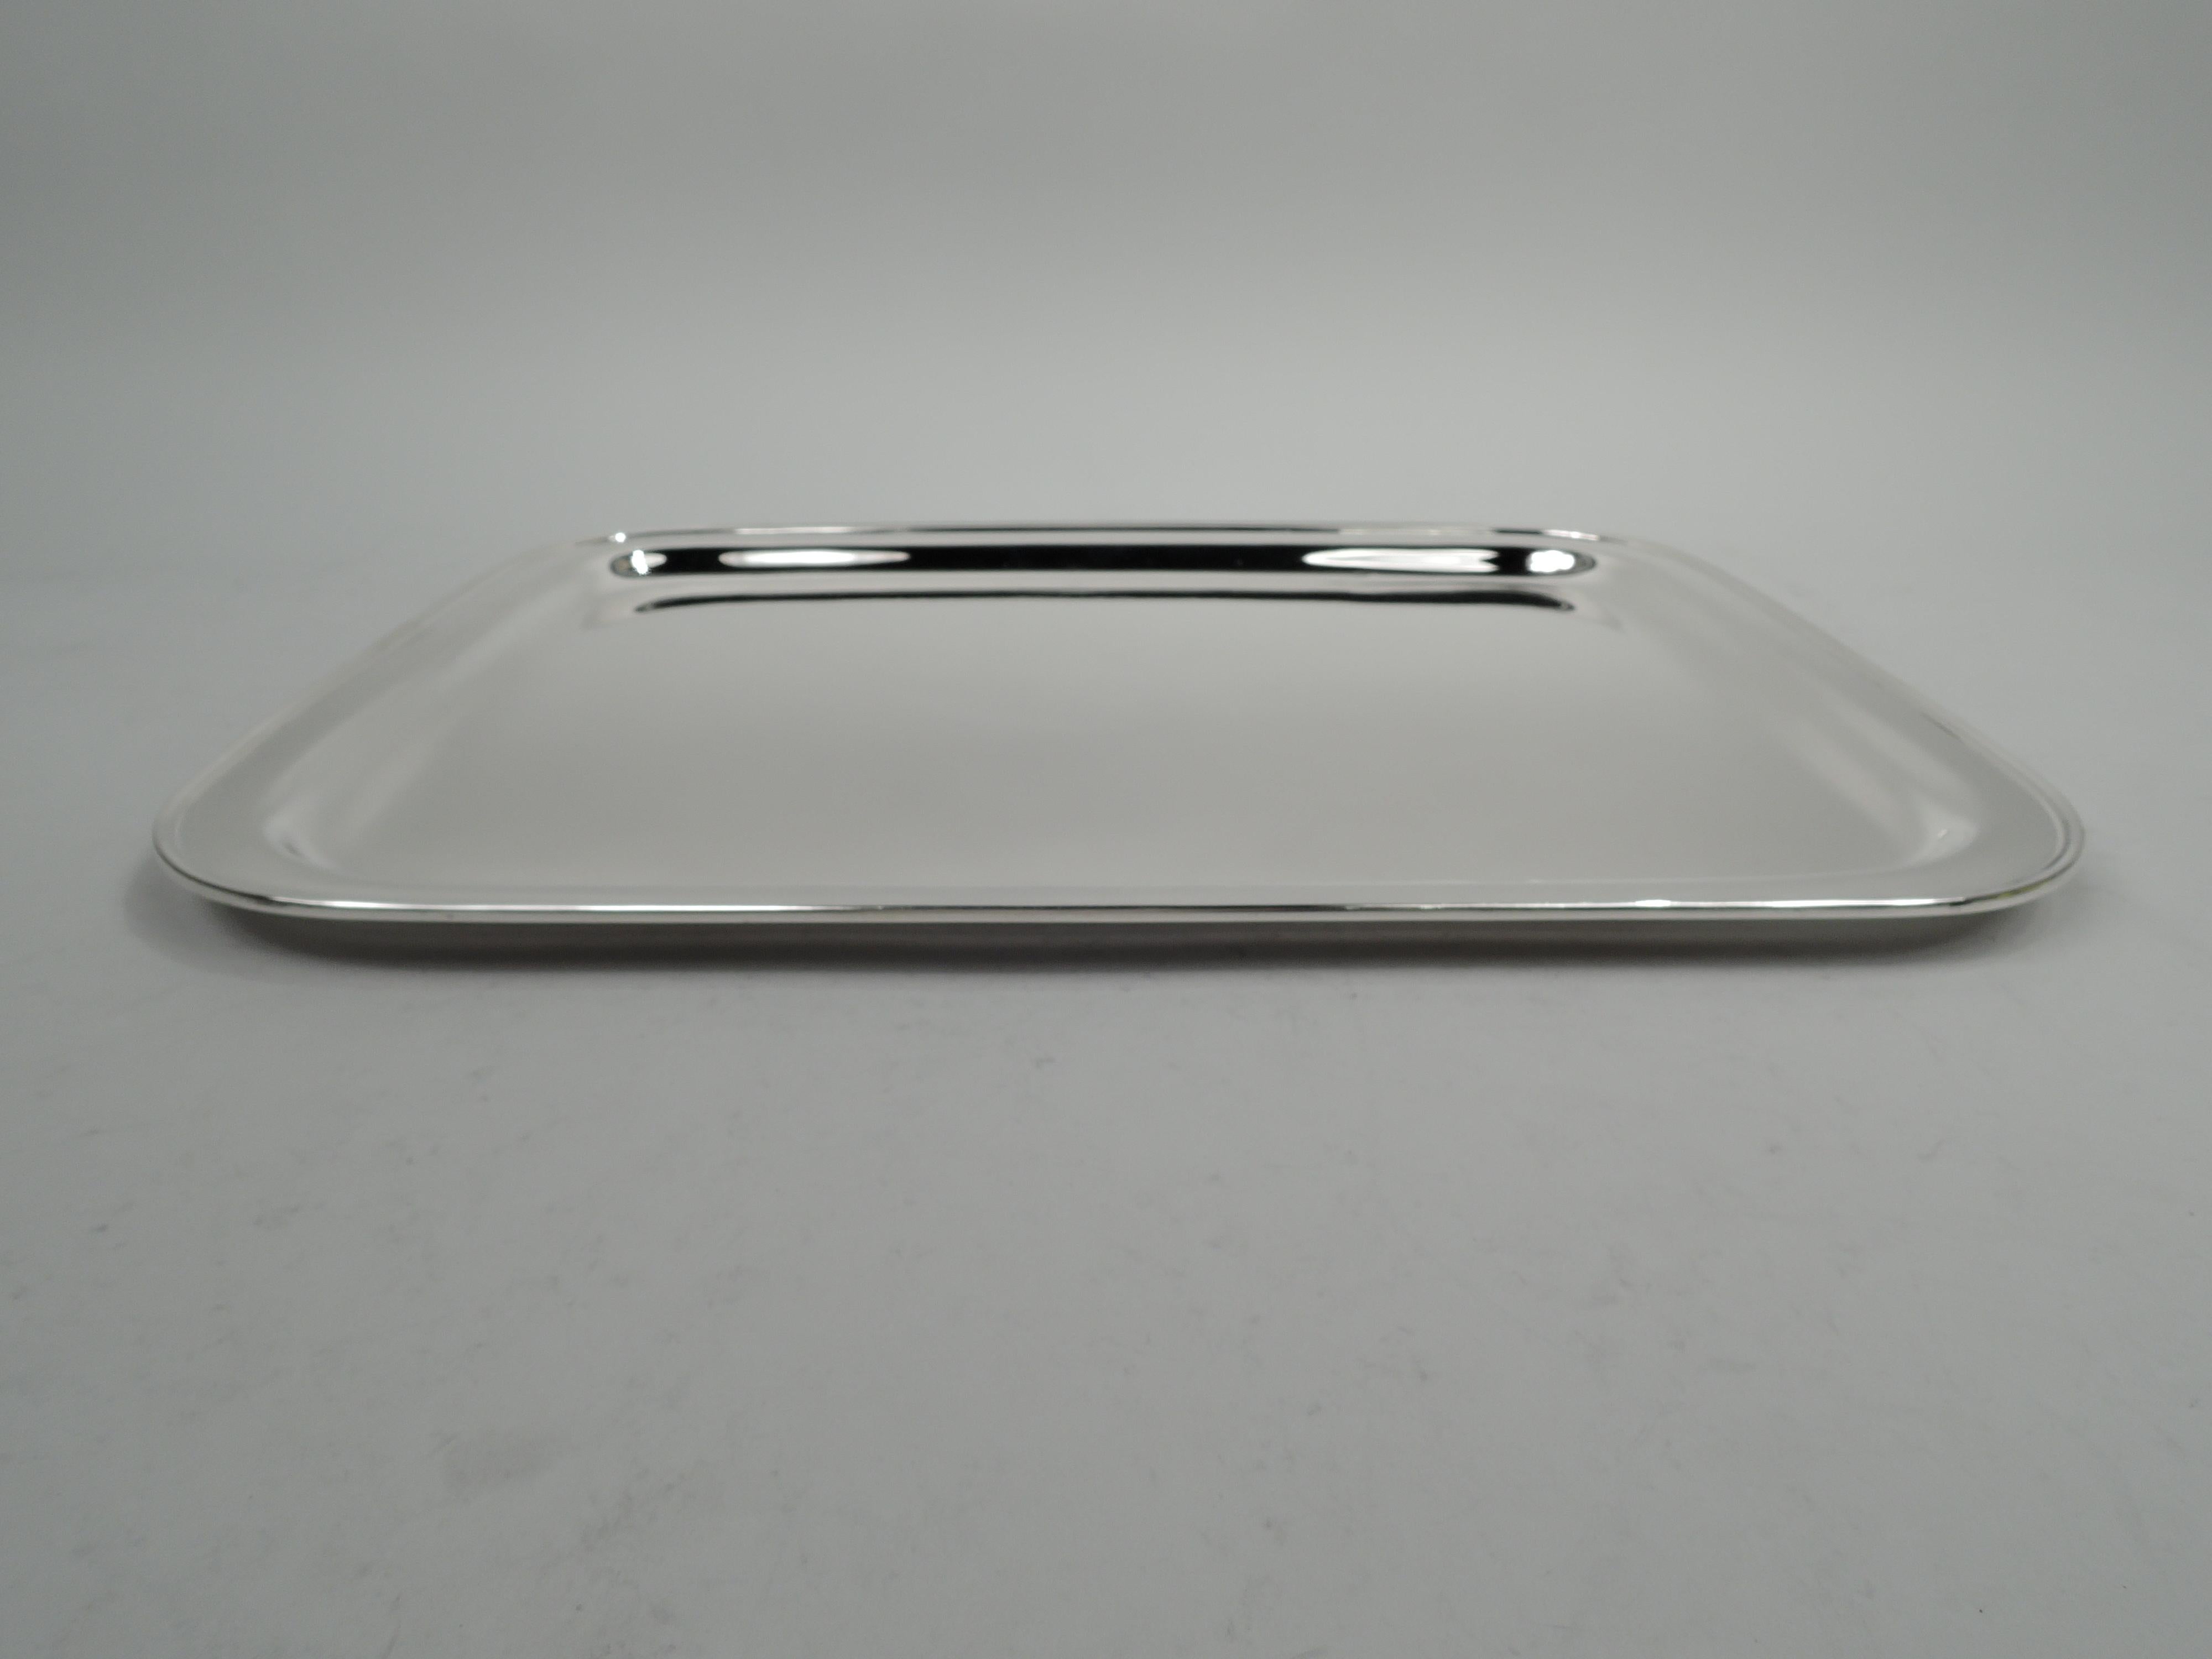 Modern sterling silver serving tray. Made by Tiffany & Co. in New York, circa 1937. Rectangular well with curved corners, flat shoulder, and molded rim. Fully marked including maker’s stamp, pattern no. 22552 (first produced in 1937), and director’s